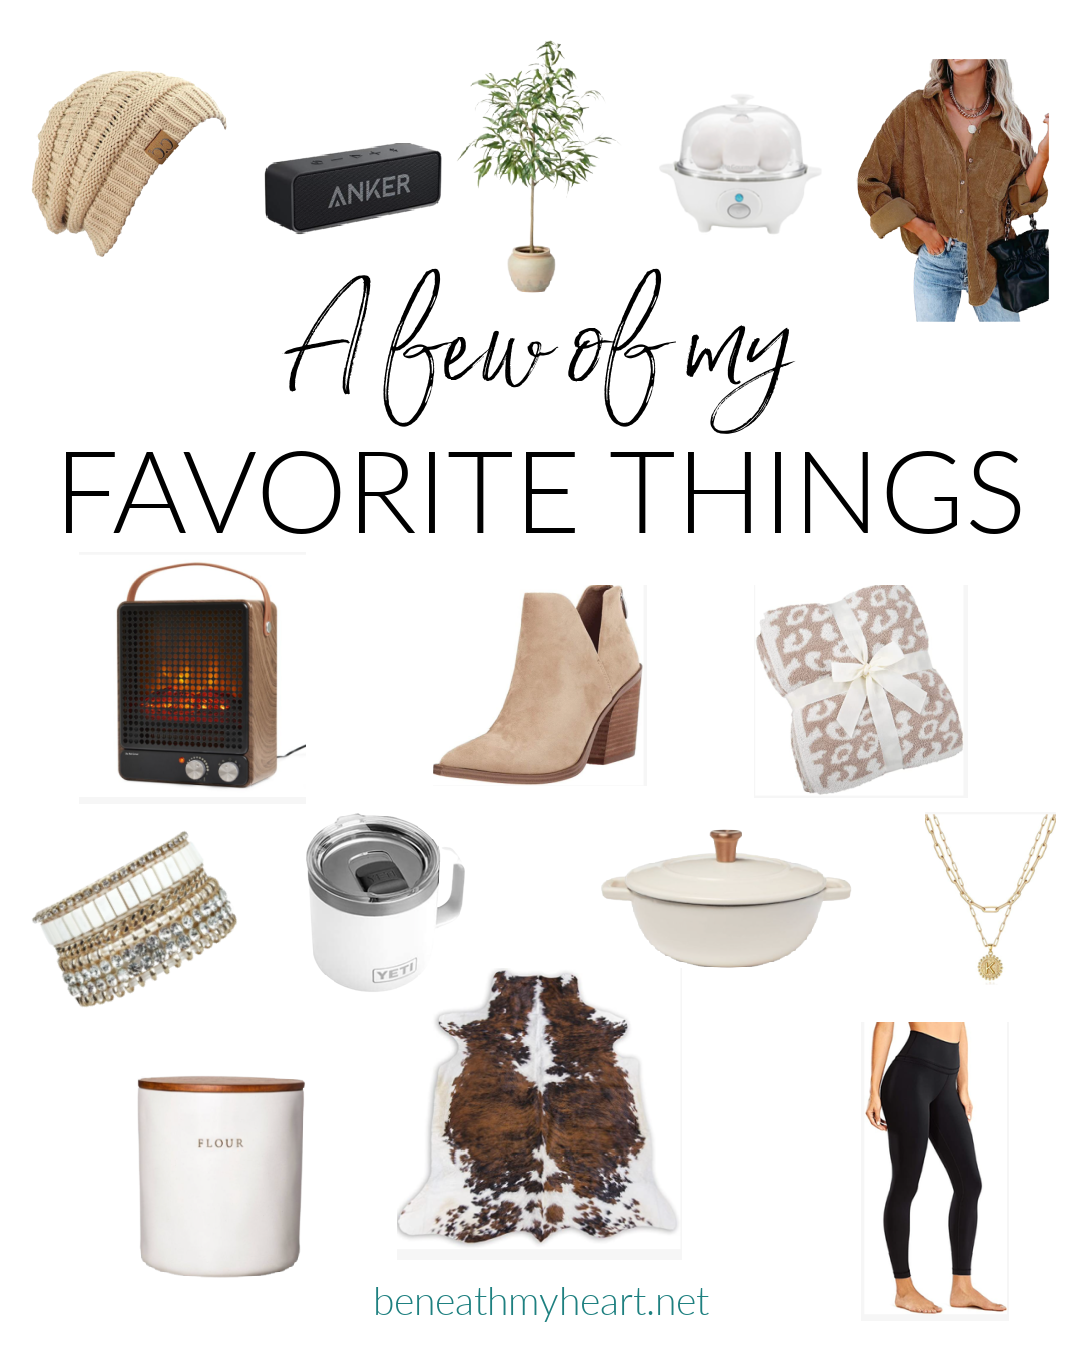 A Few of My Favorite Things!